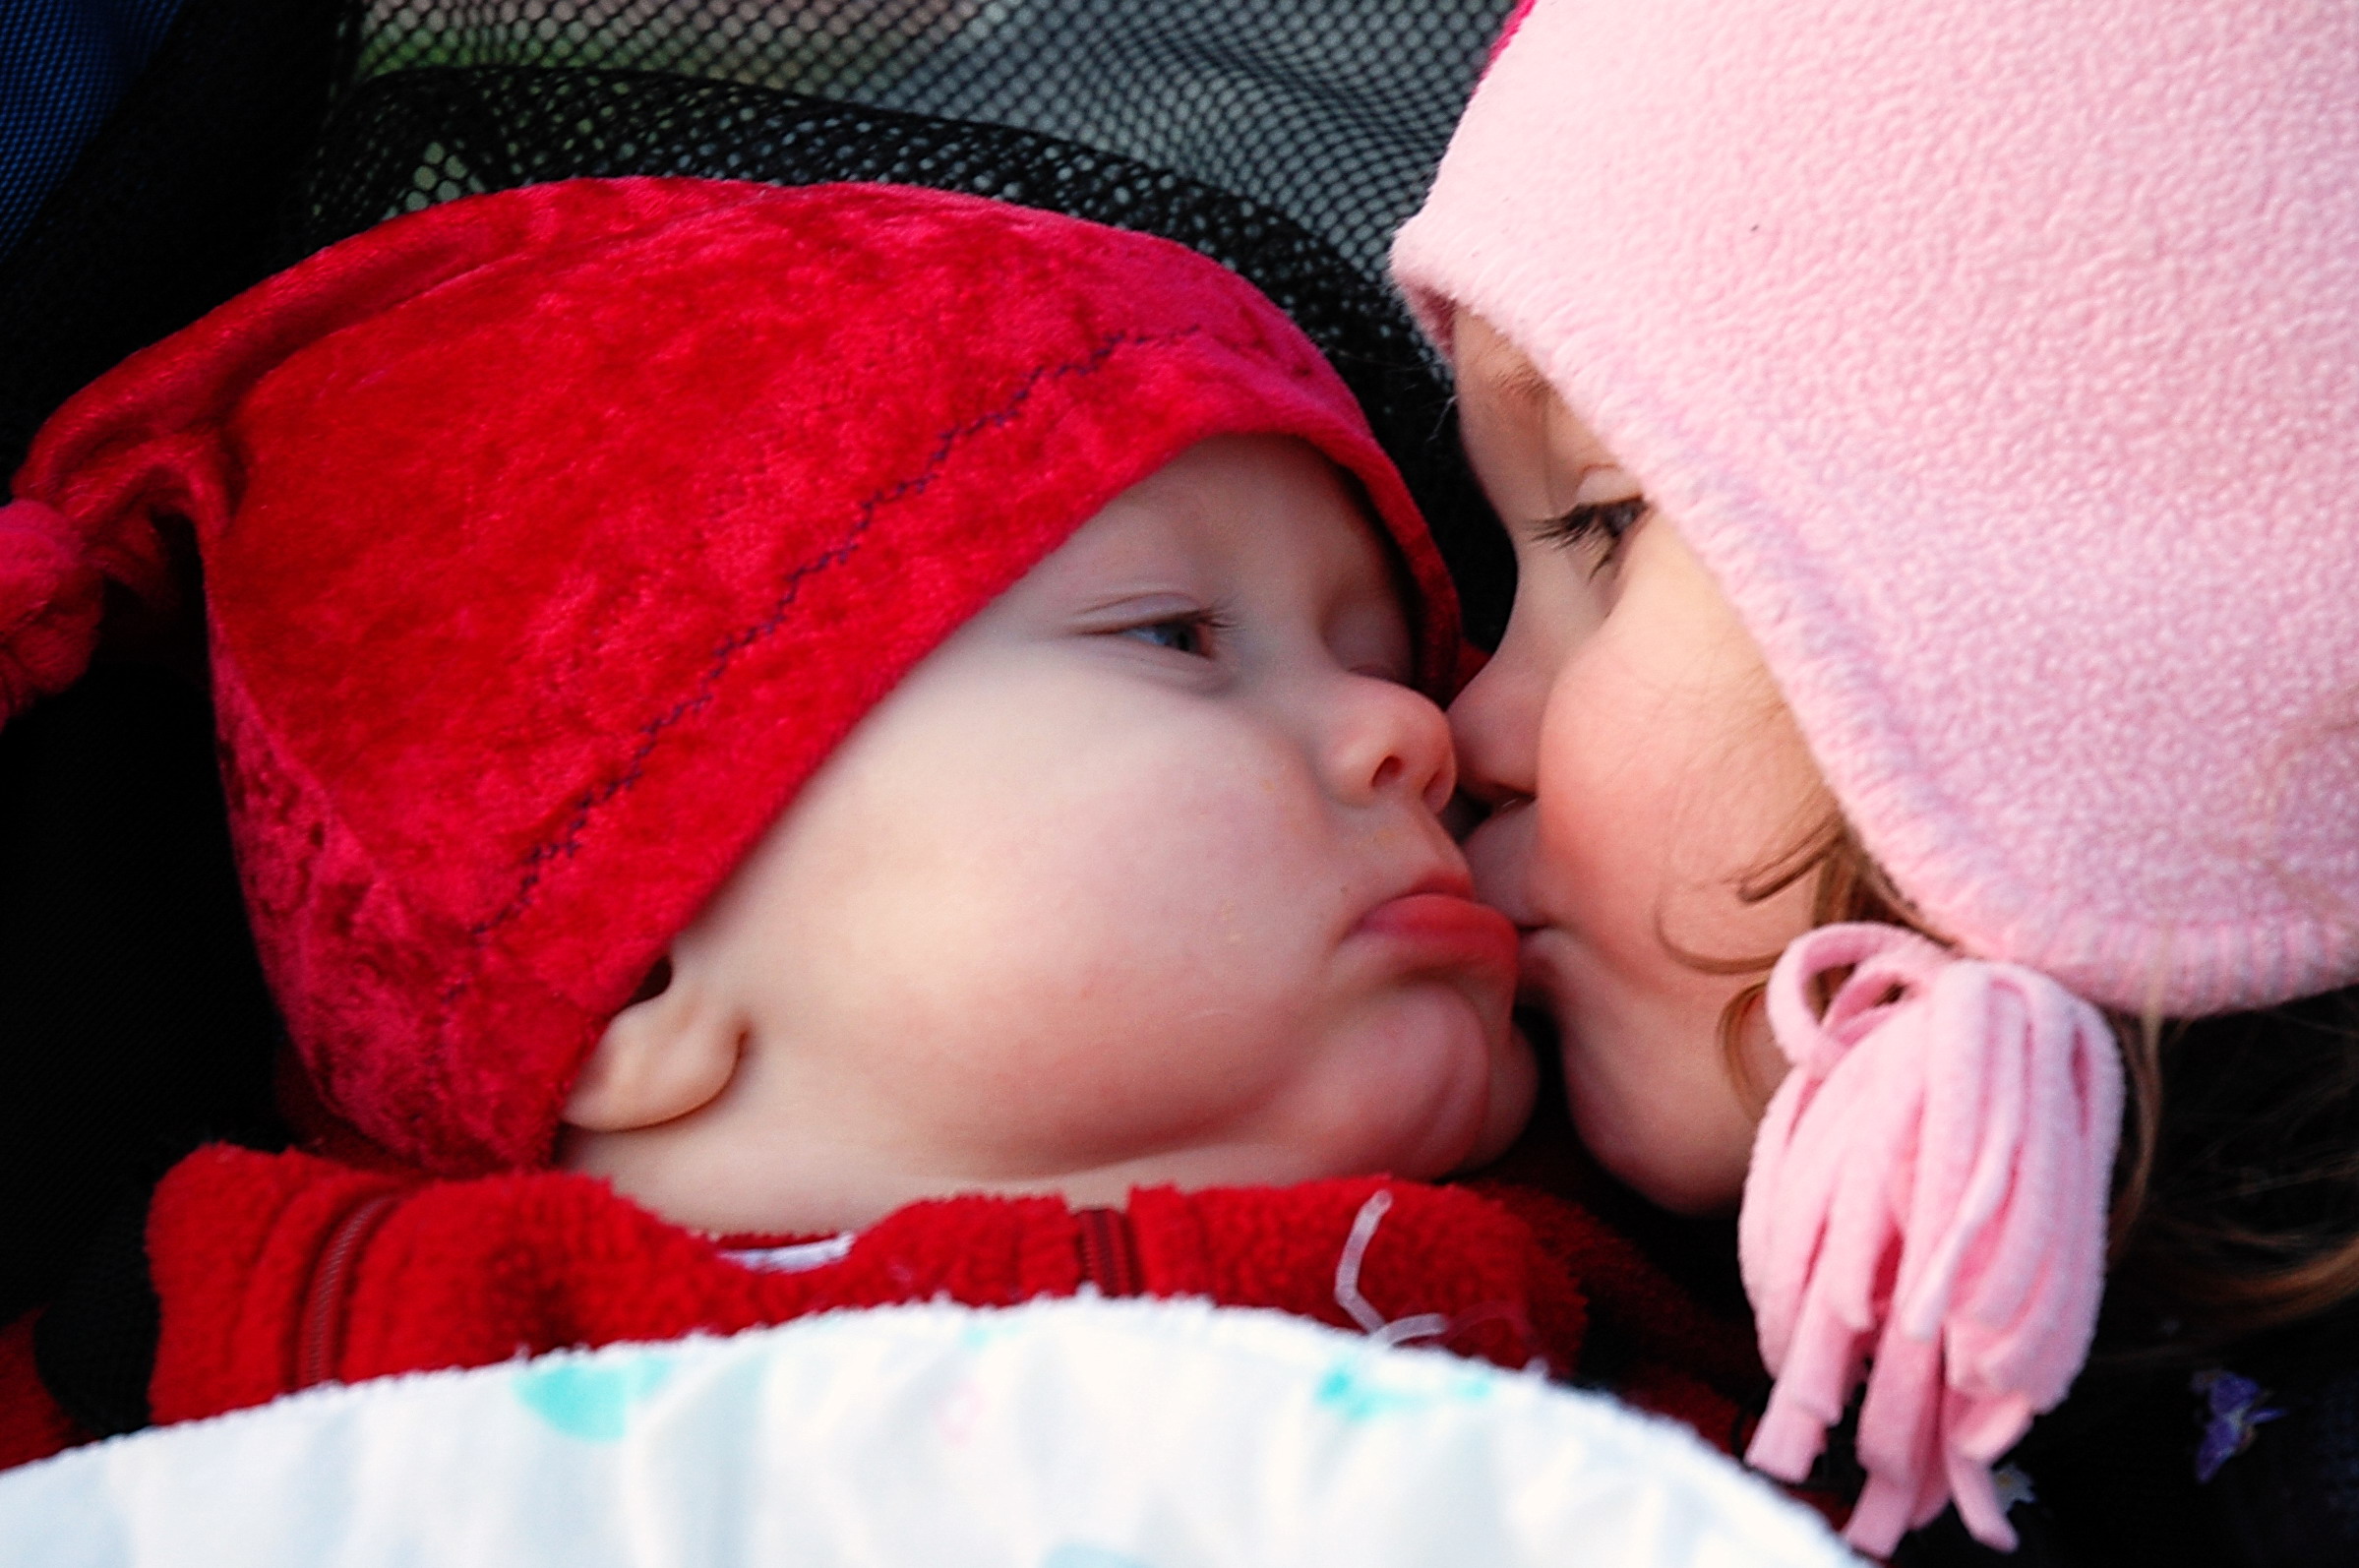 Smooches_(baby_and_child_kiss).jpg